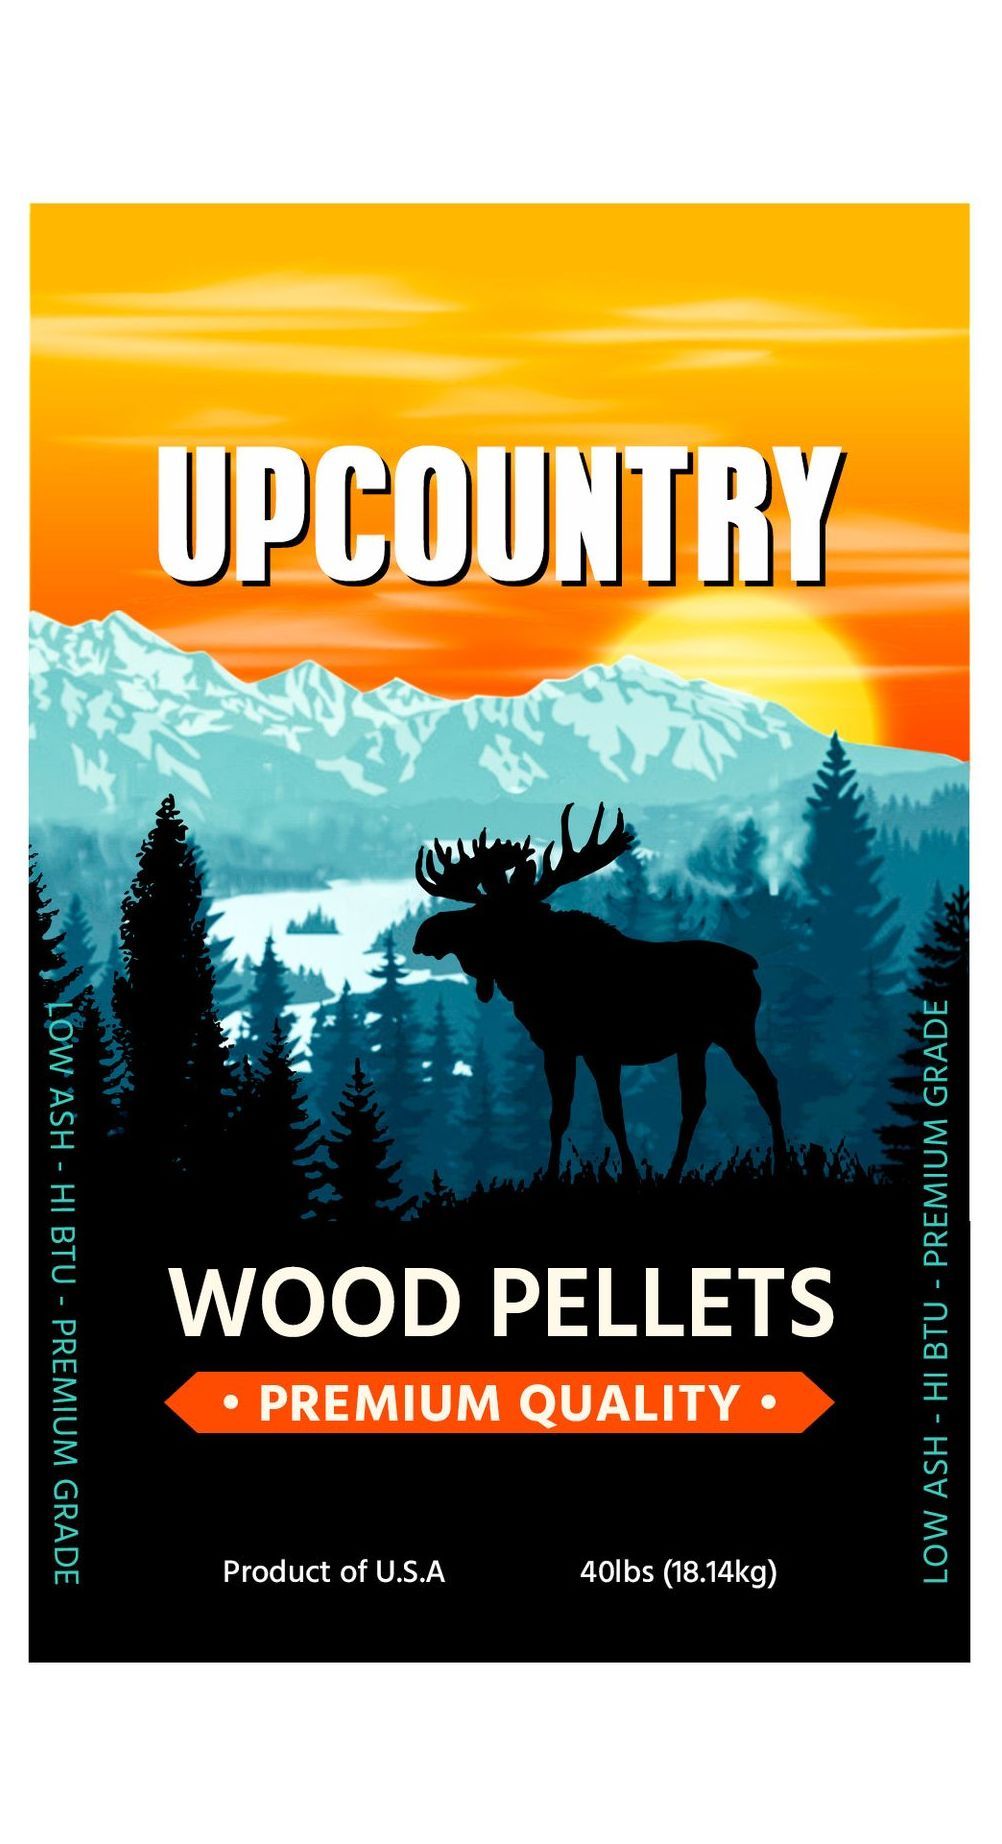 Upcountry Hardwood Blend pellets that are sold by Pellets Now